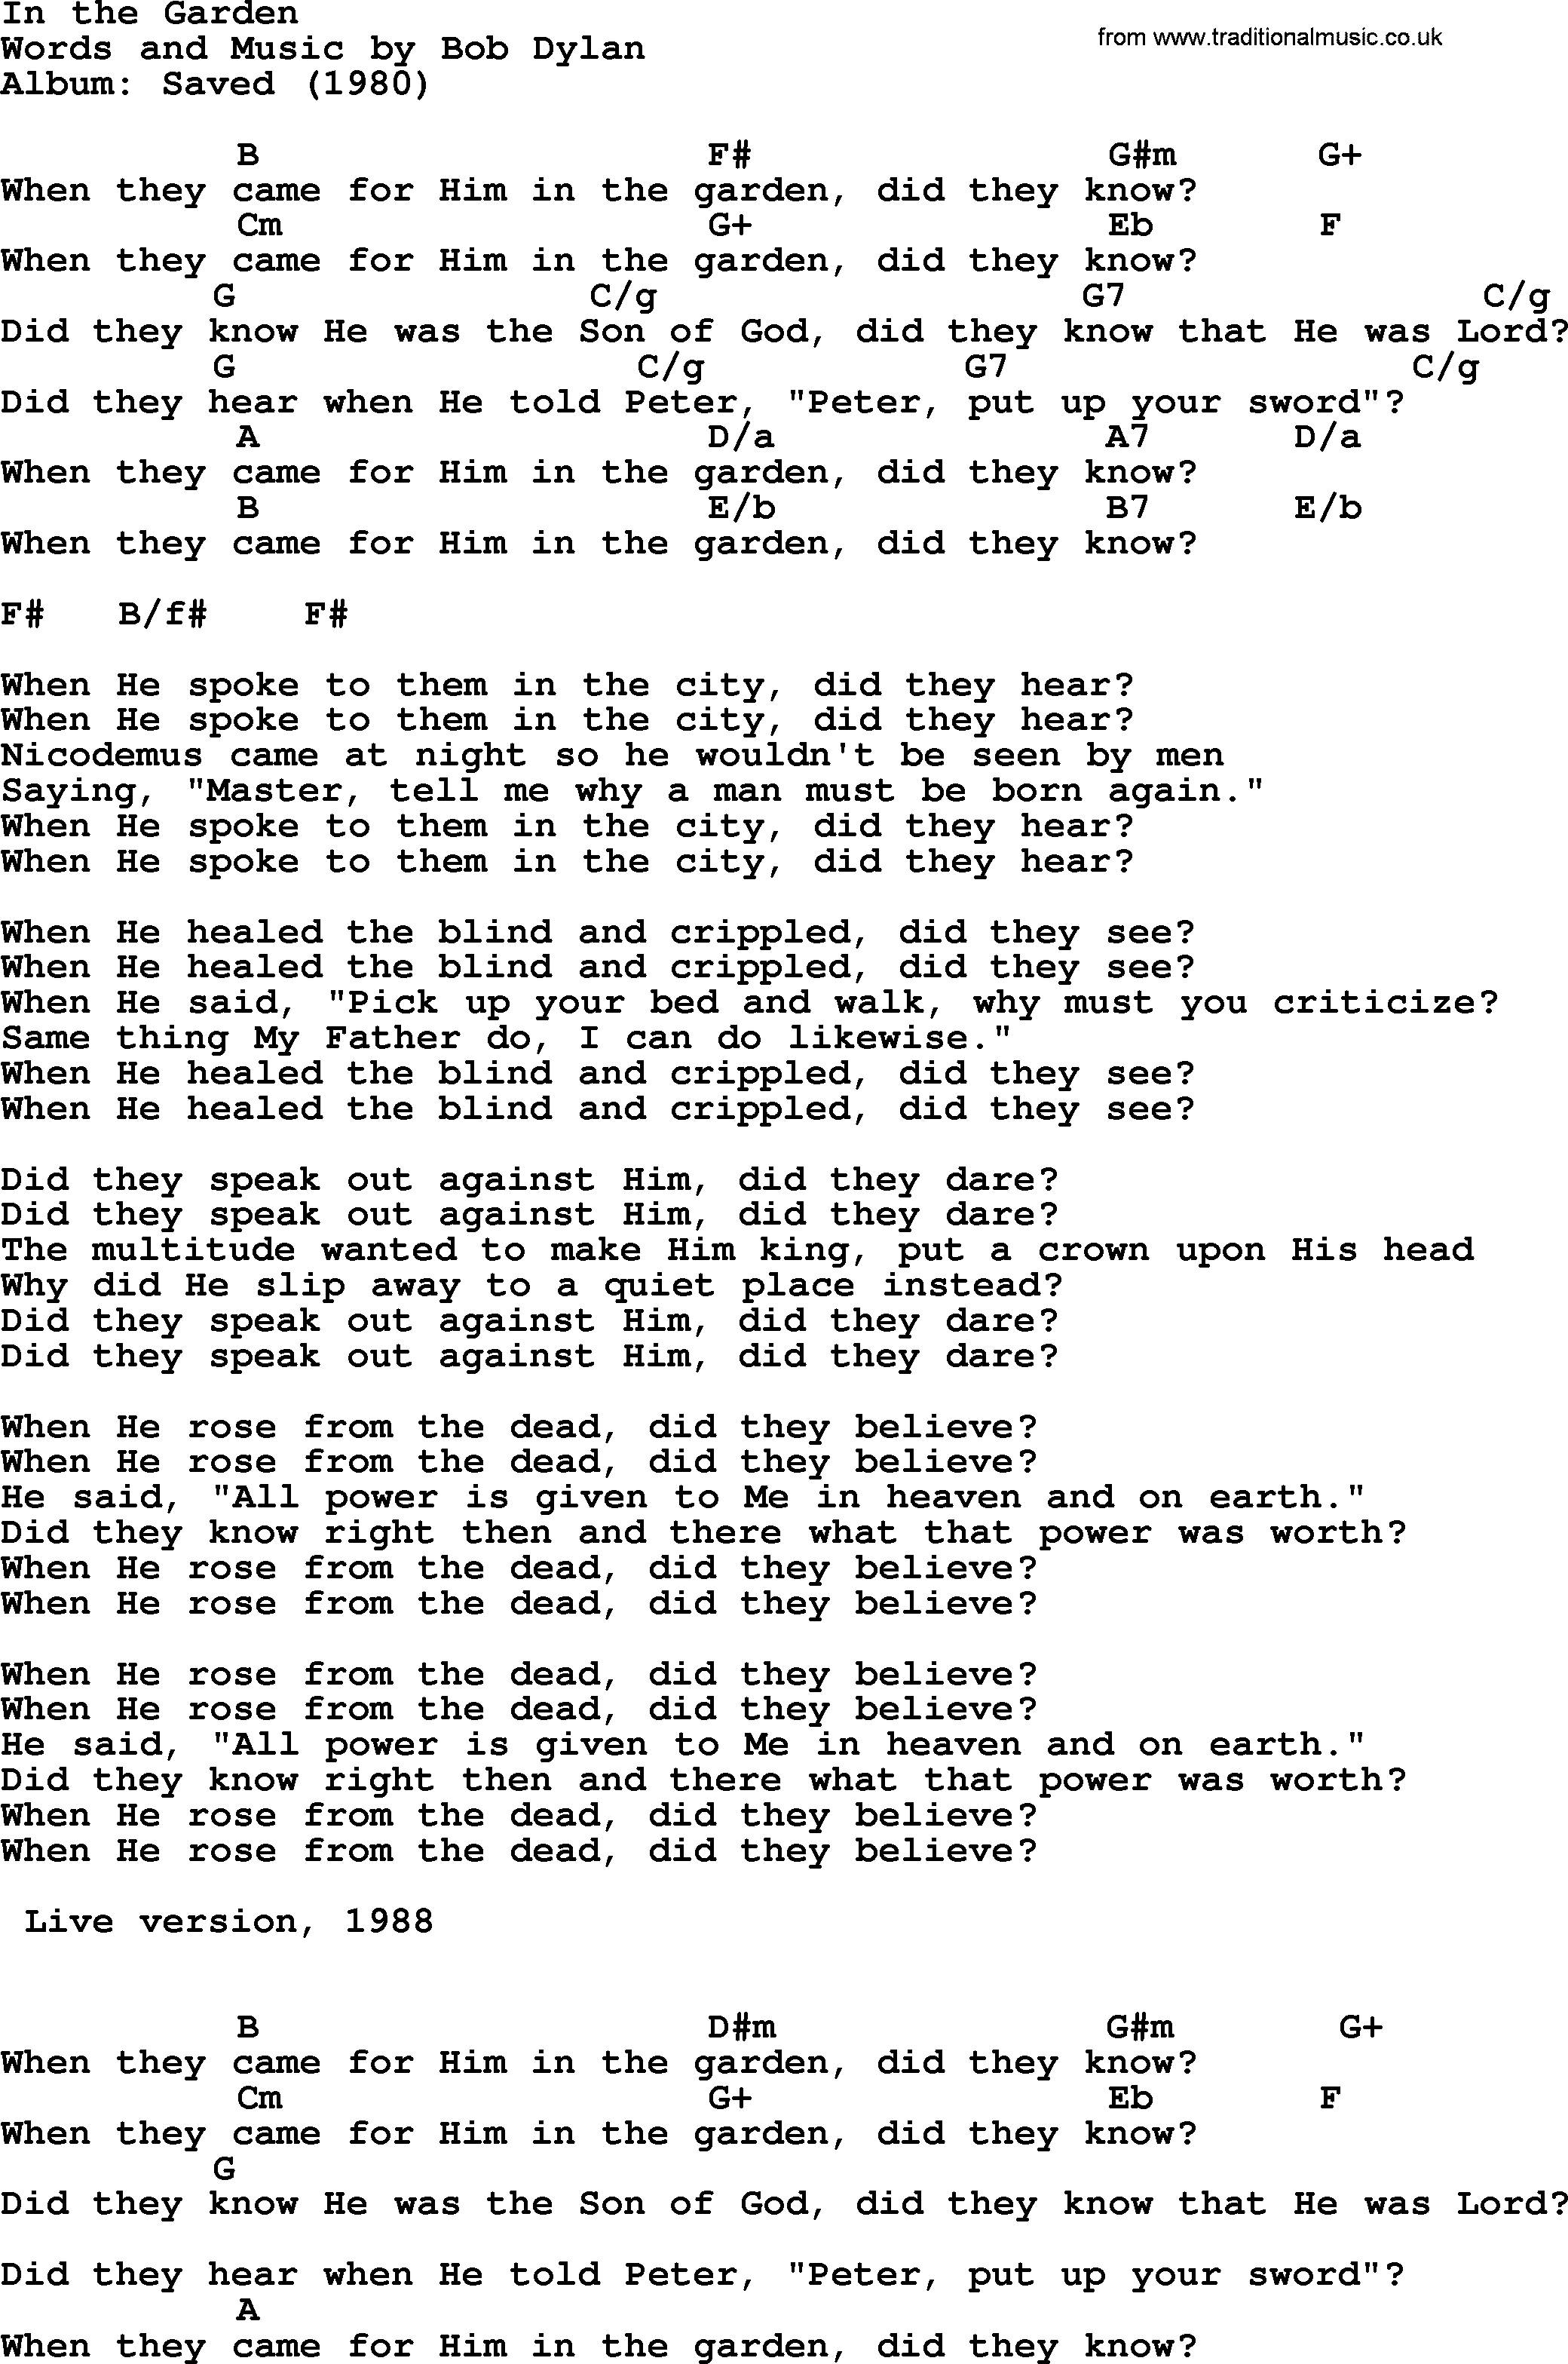 Bob Dylan song, lyrics with chords - In the Garden